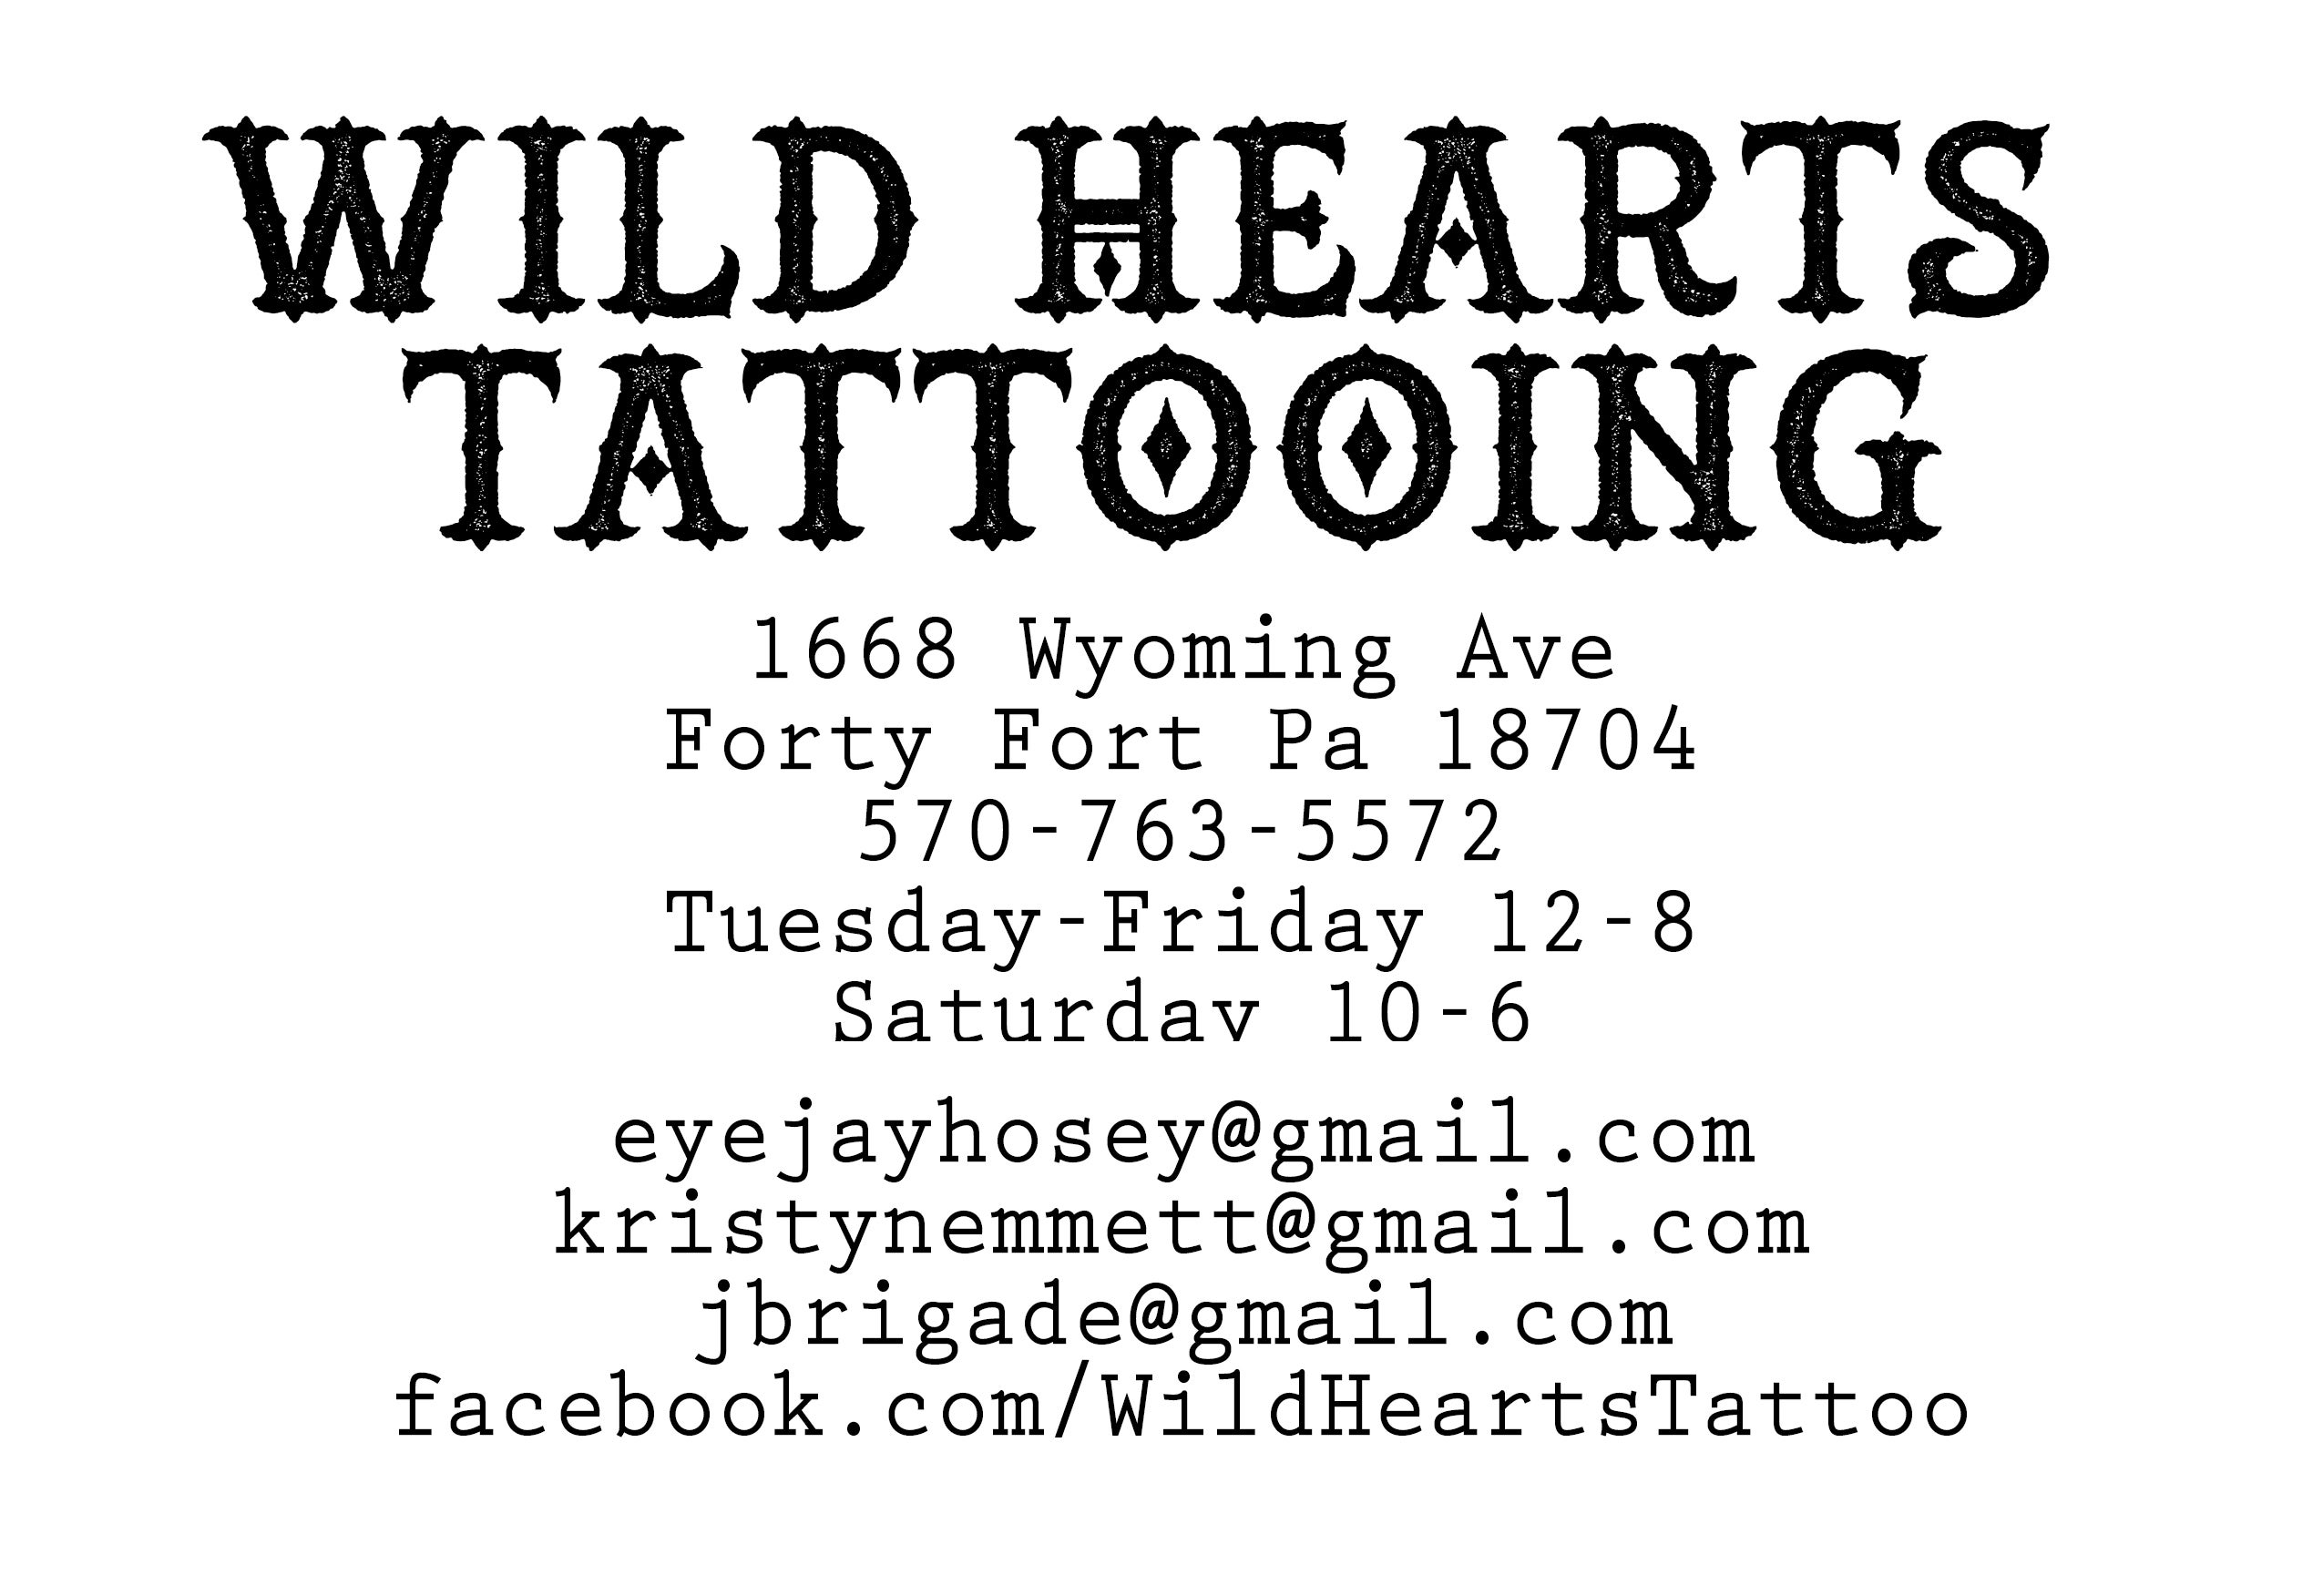 Wild Hearts Tattoo 1668 Wyoming Ave, Forty Fort Pennsylvania 18704